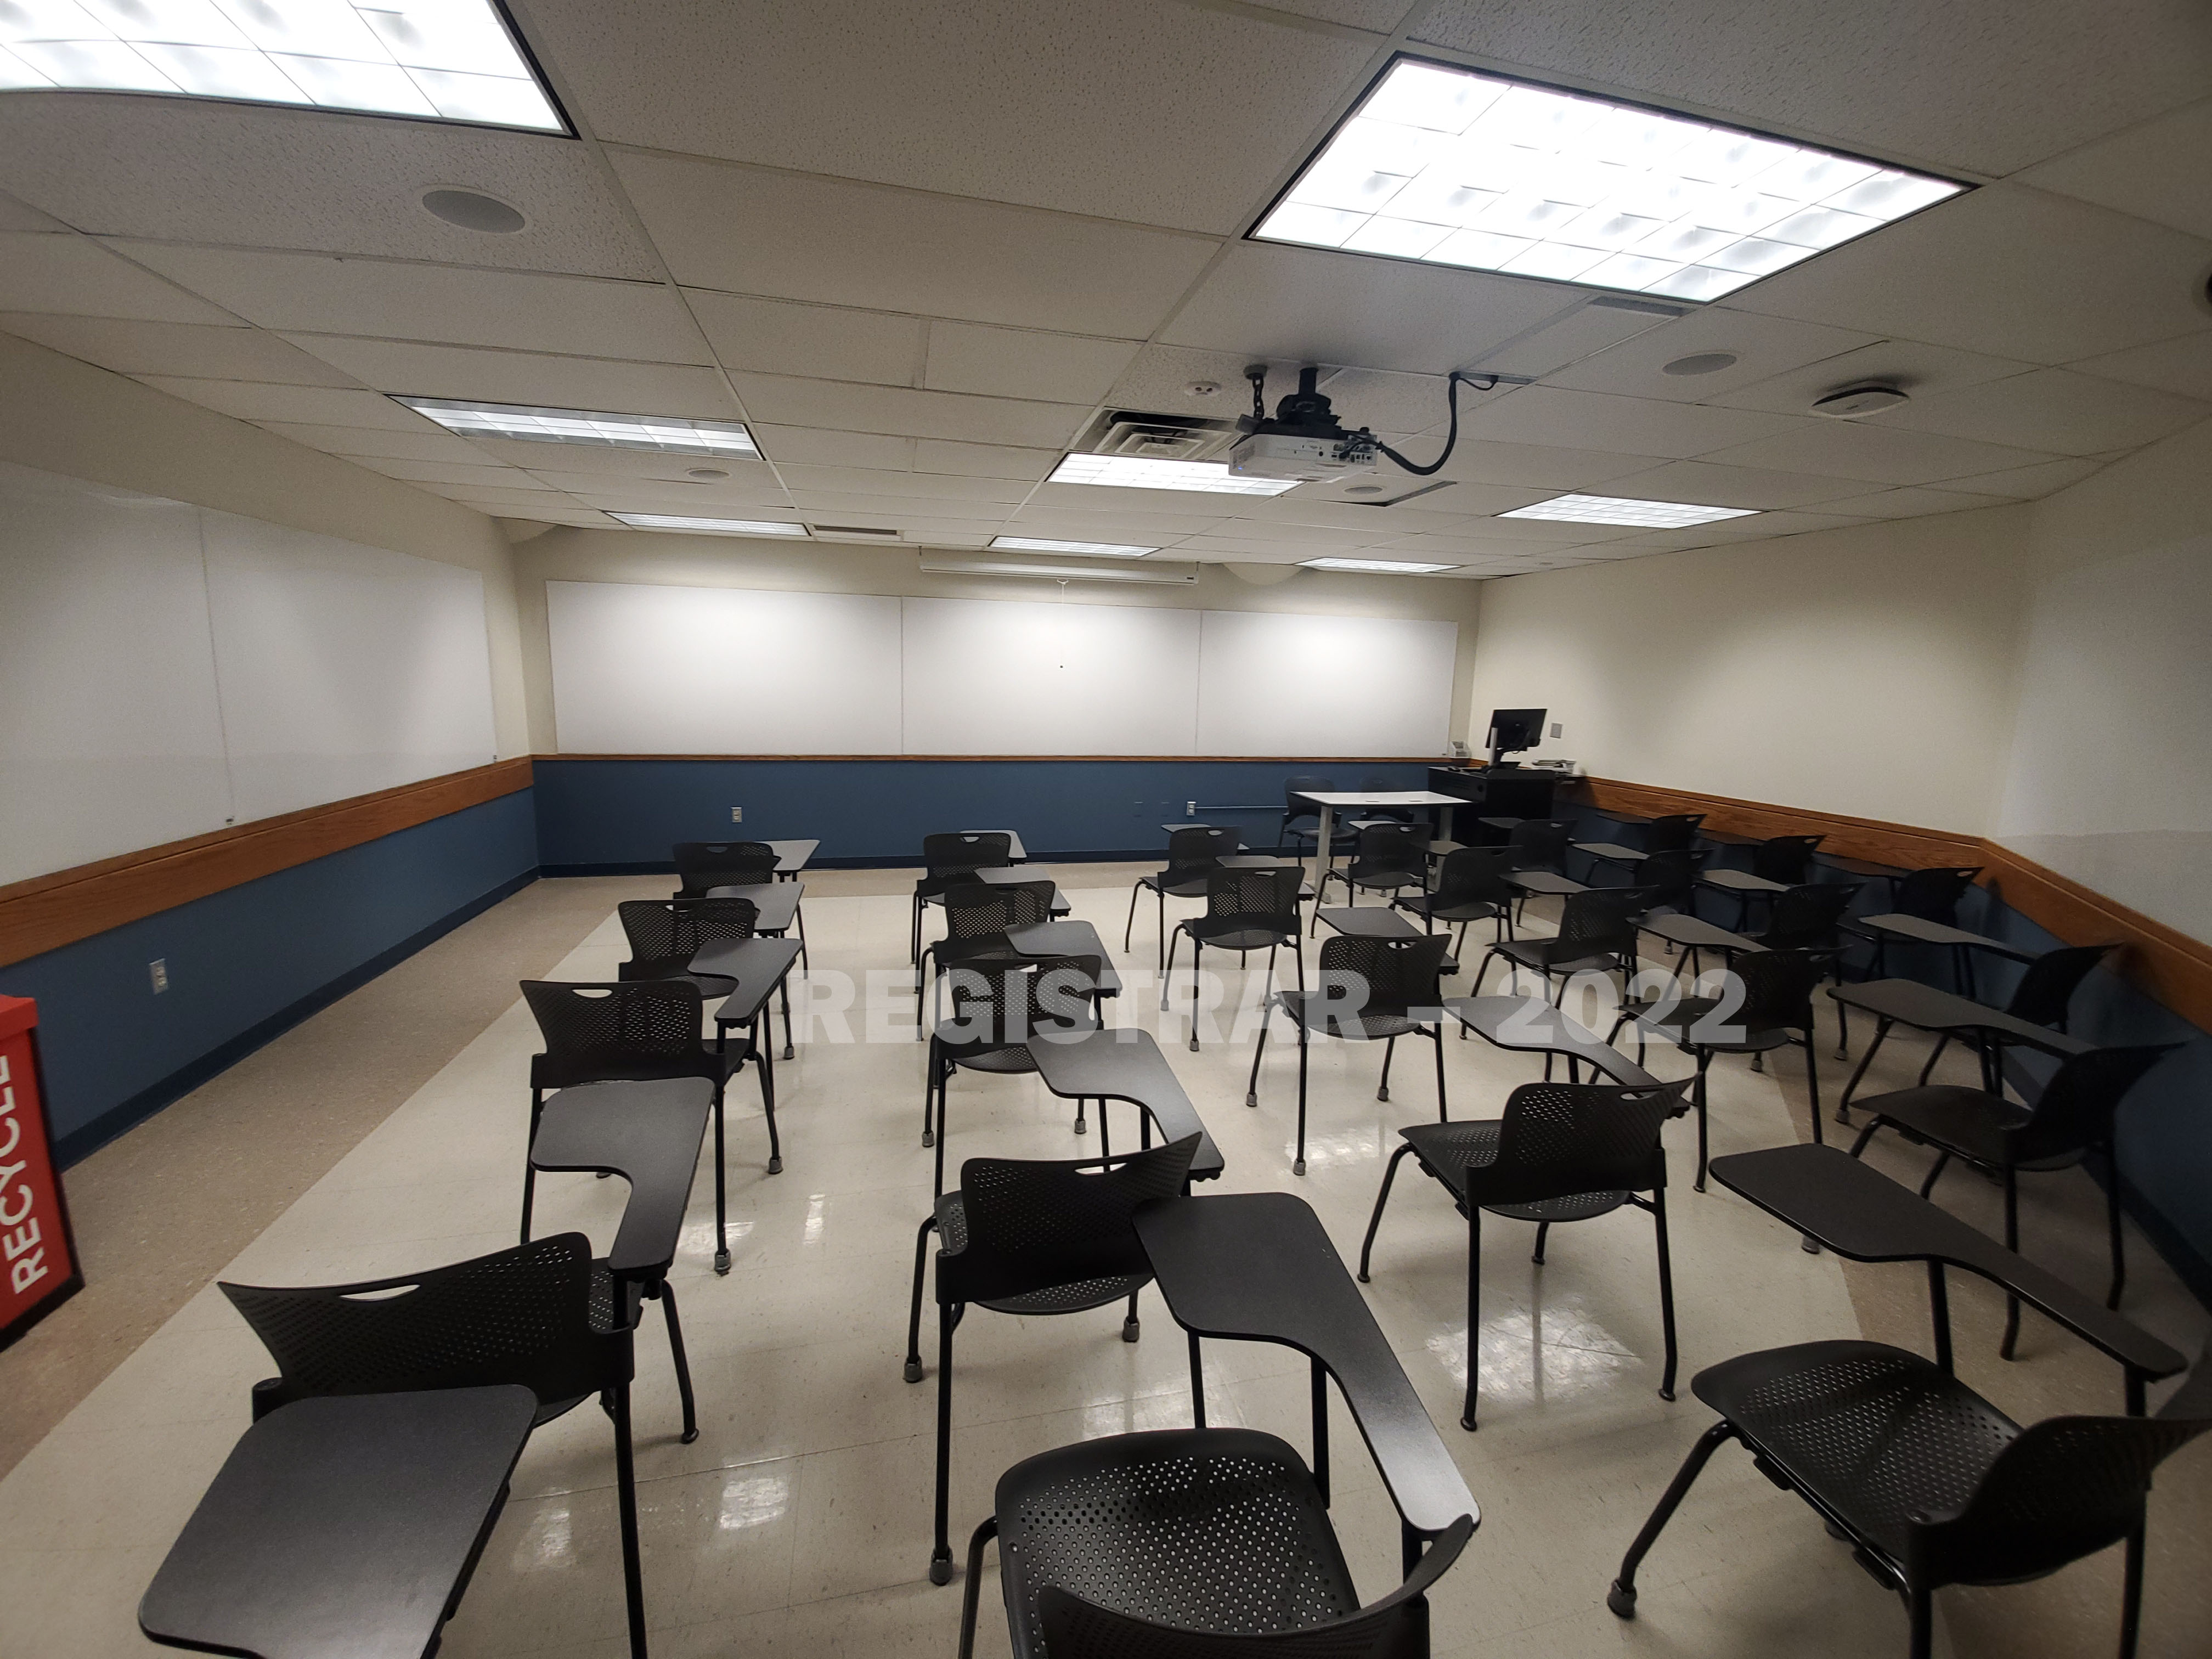 Enarson Classroom Building room 211 ultra wide angle view from the back of the room